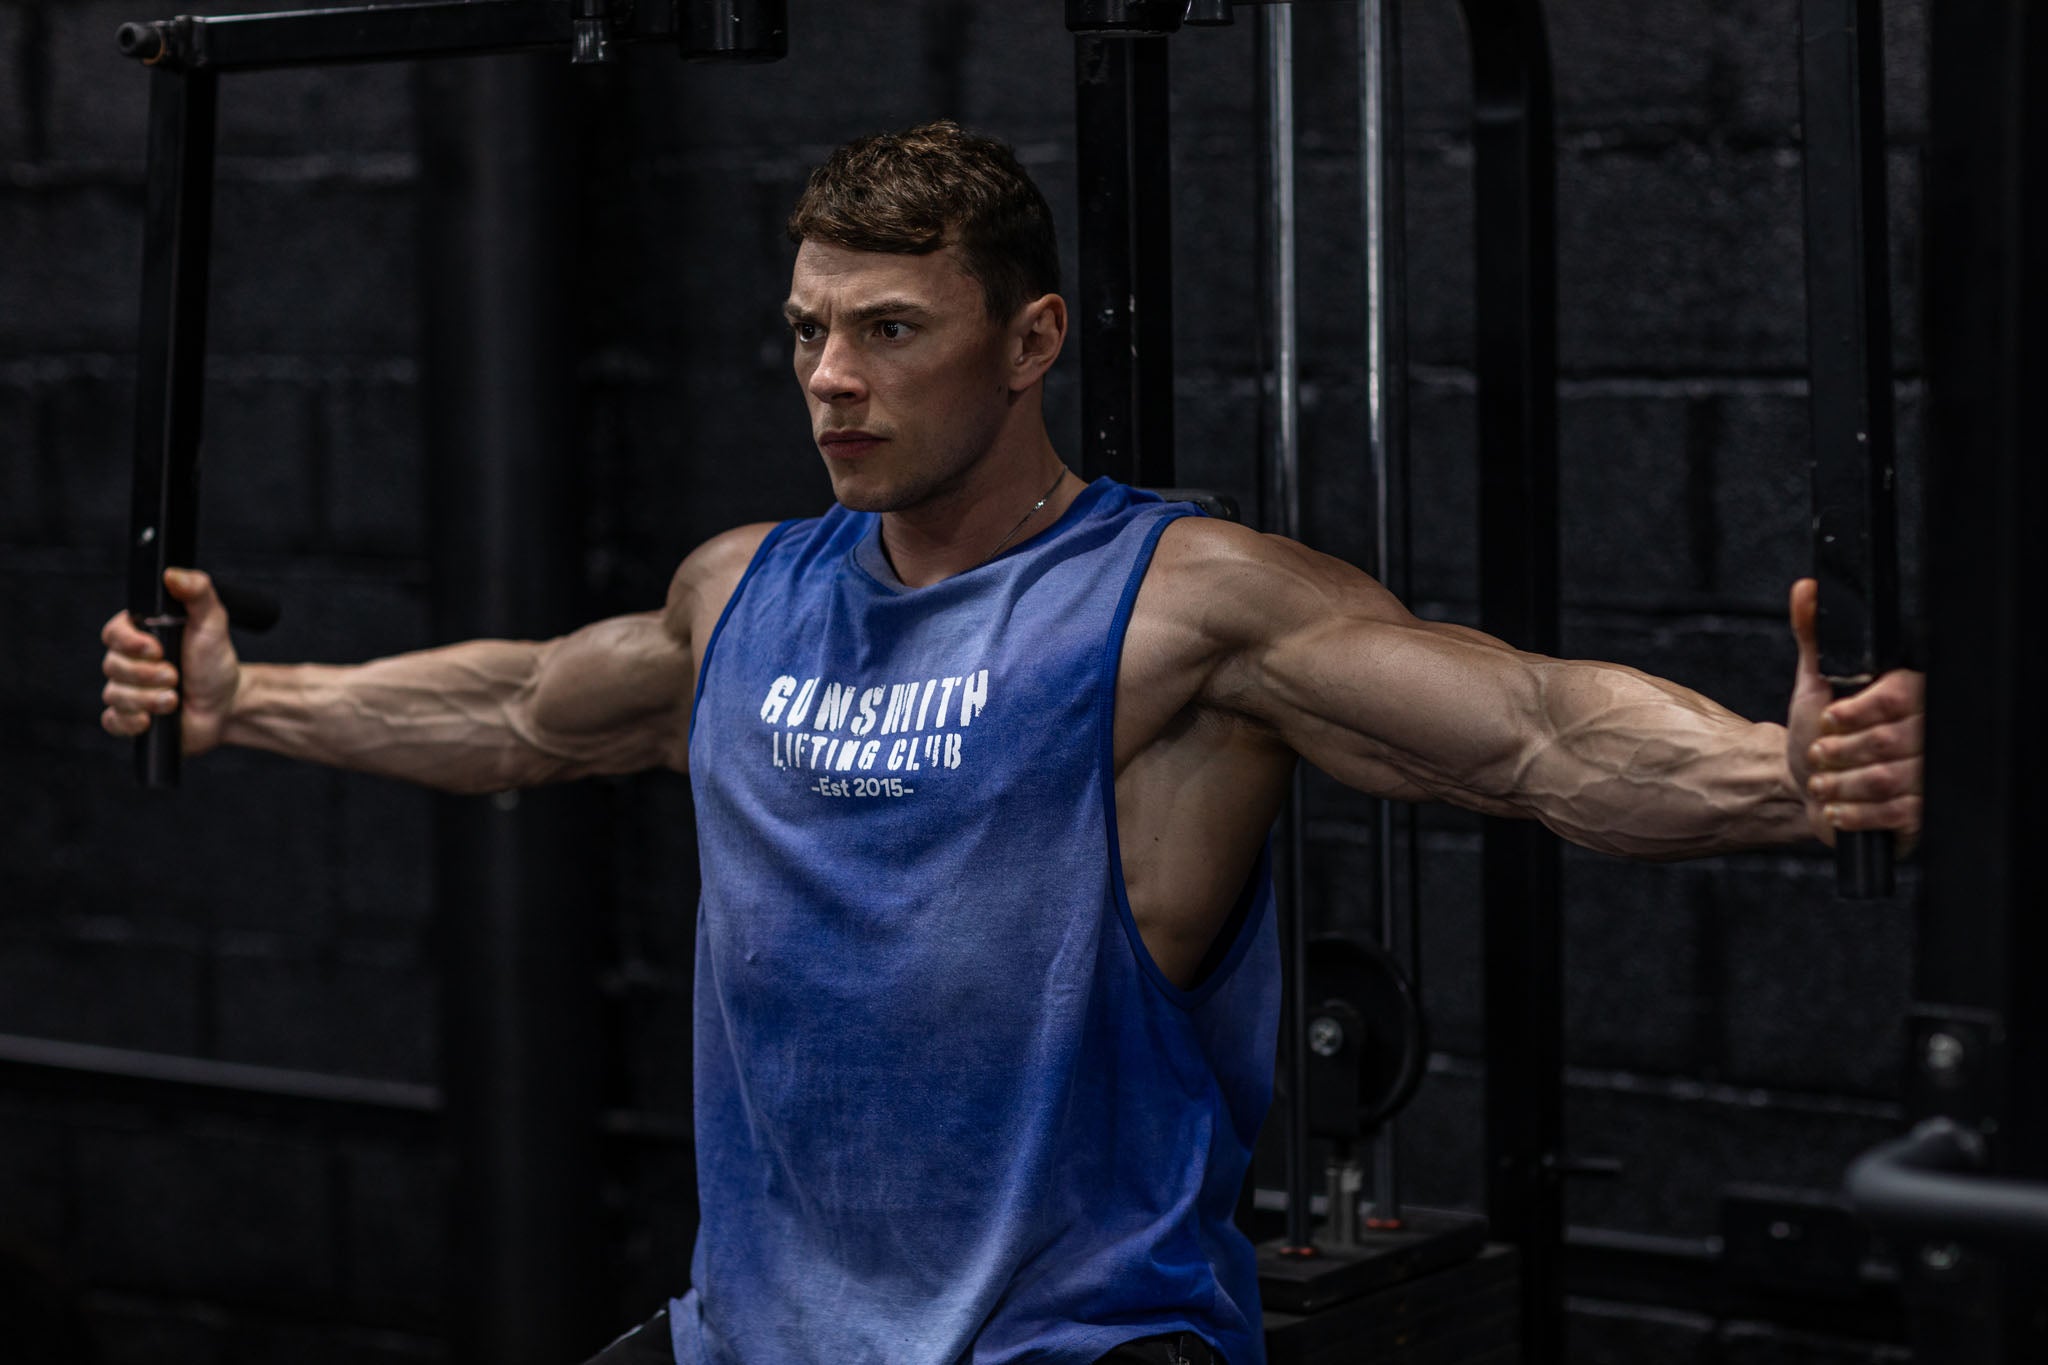 Athlete in the gym wearing the Oversized acid wash gym vest in blue